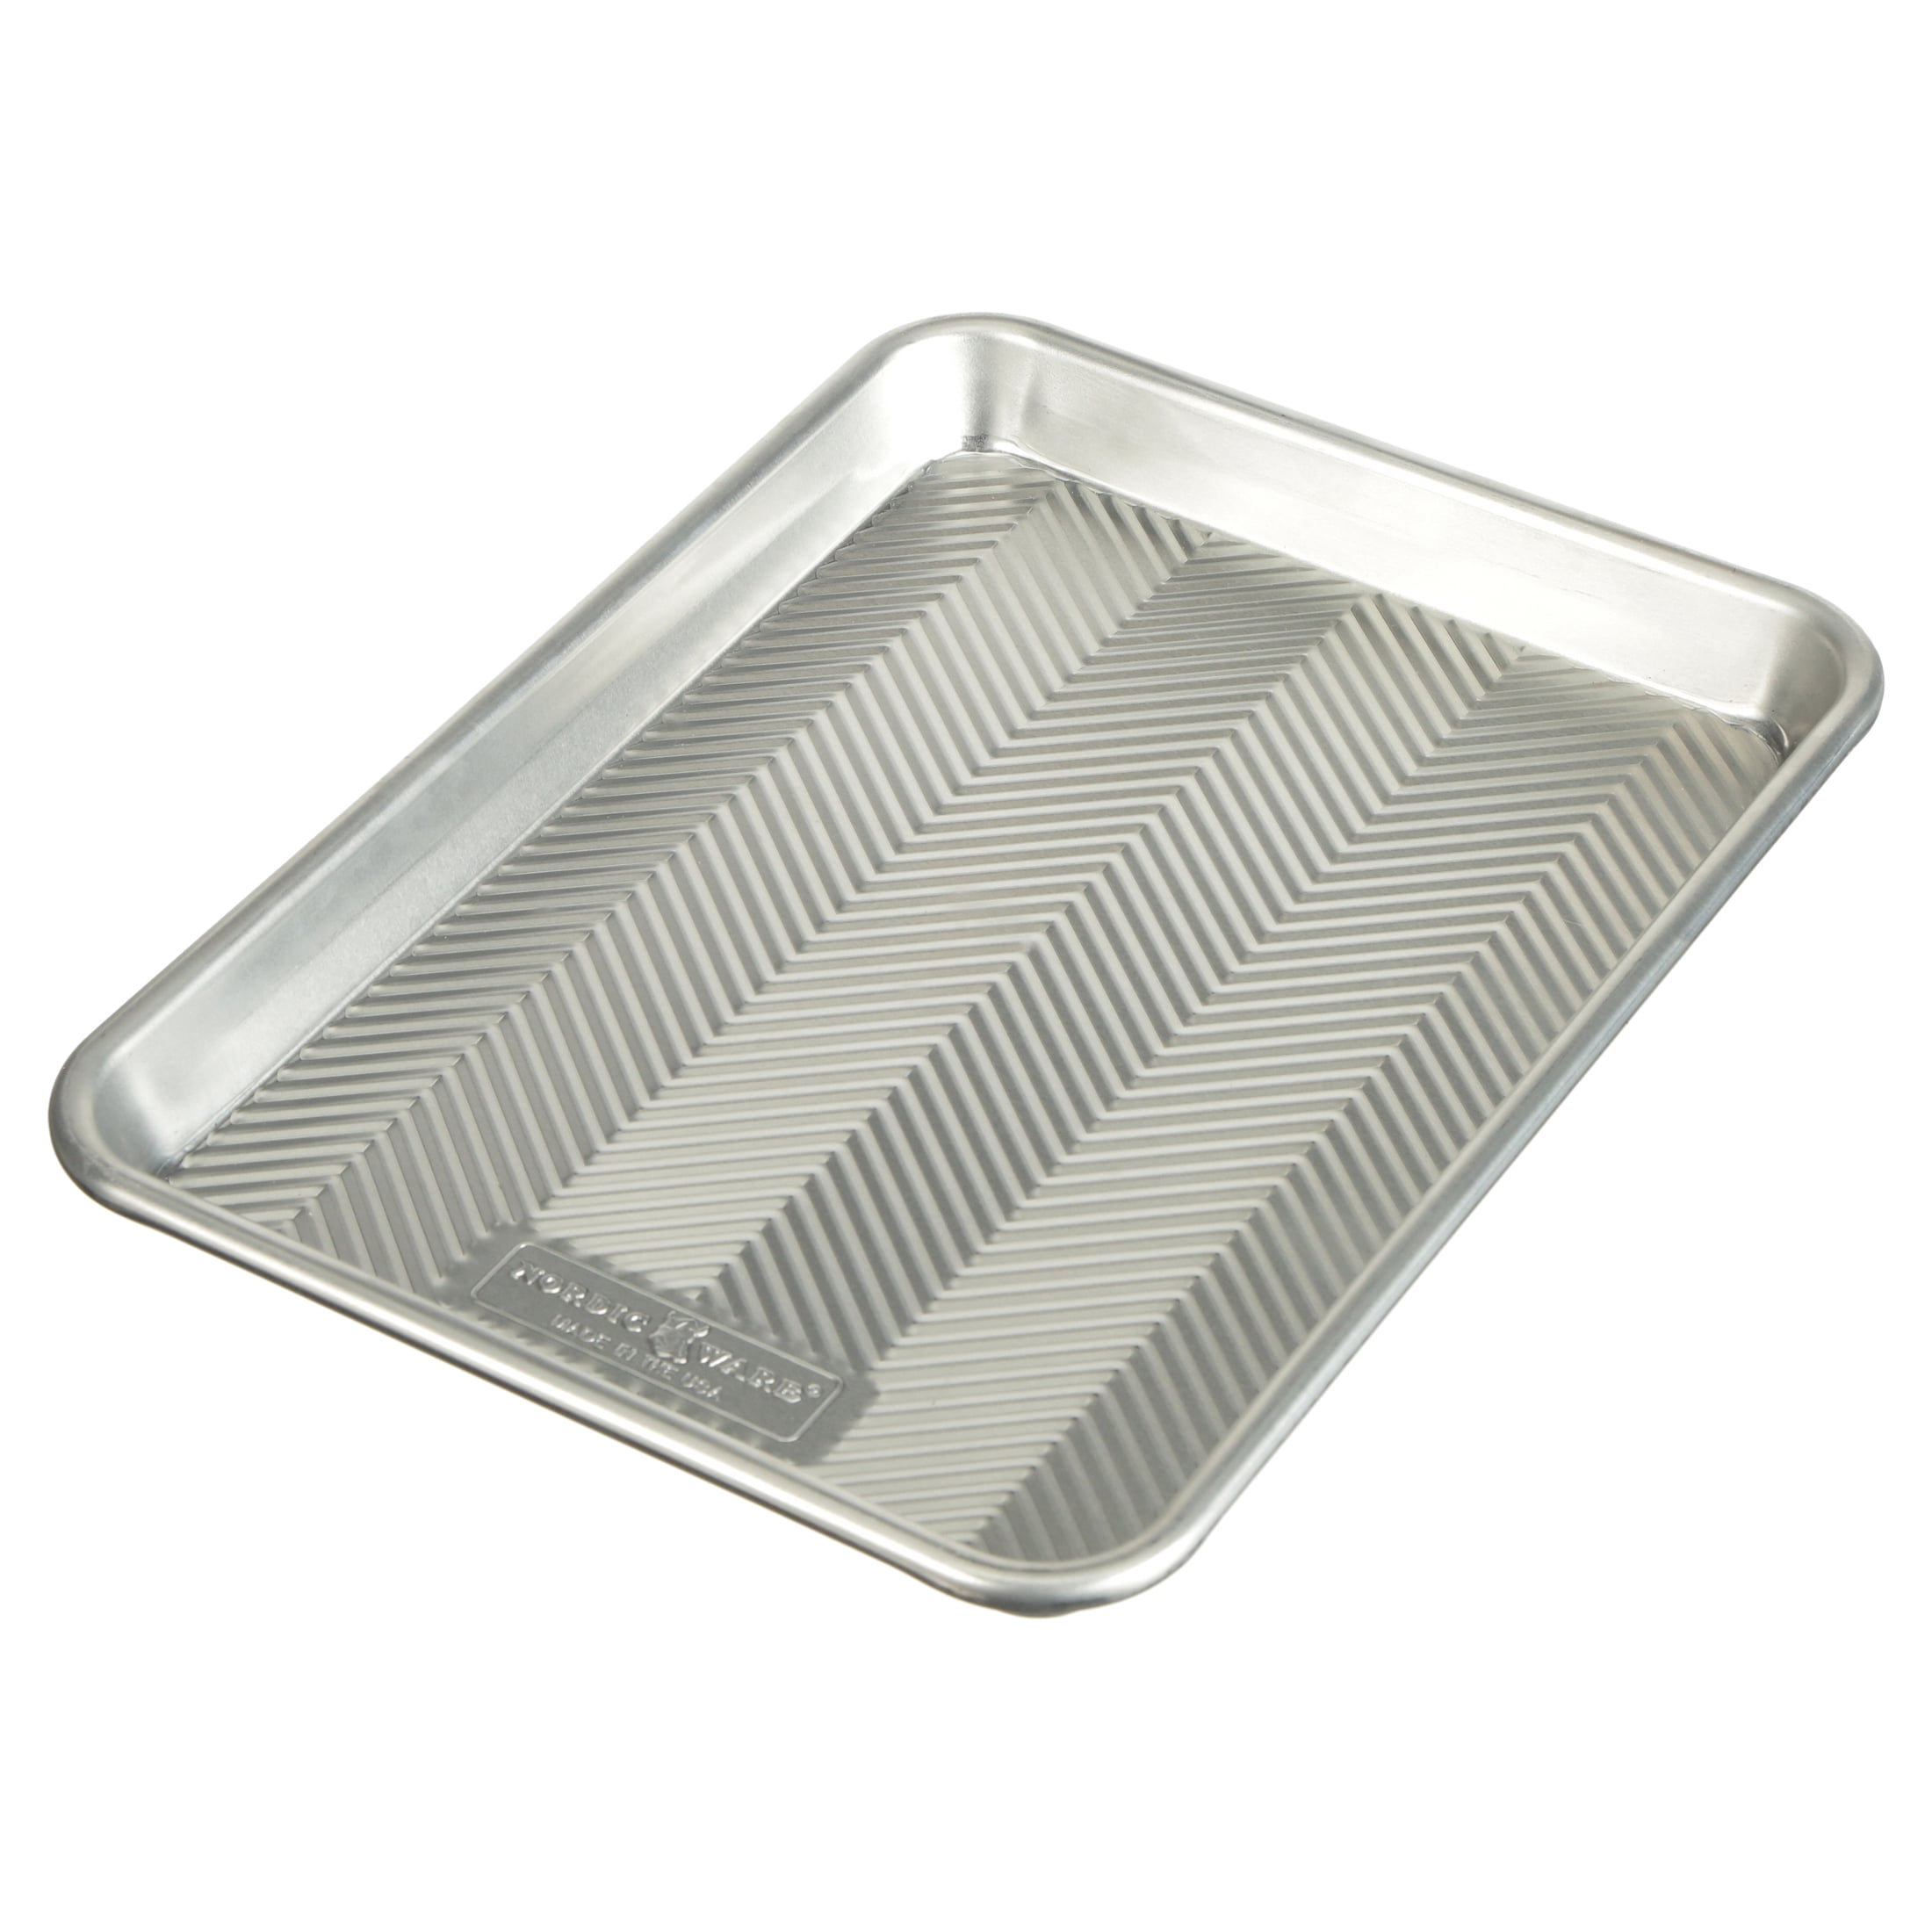 Nordic Ware Natural Aluminum Roasting & Crisping Pan with Black Nonstick Rack, 19.6 inch x 12.9 inch x 2.3 inch, Silver